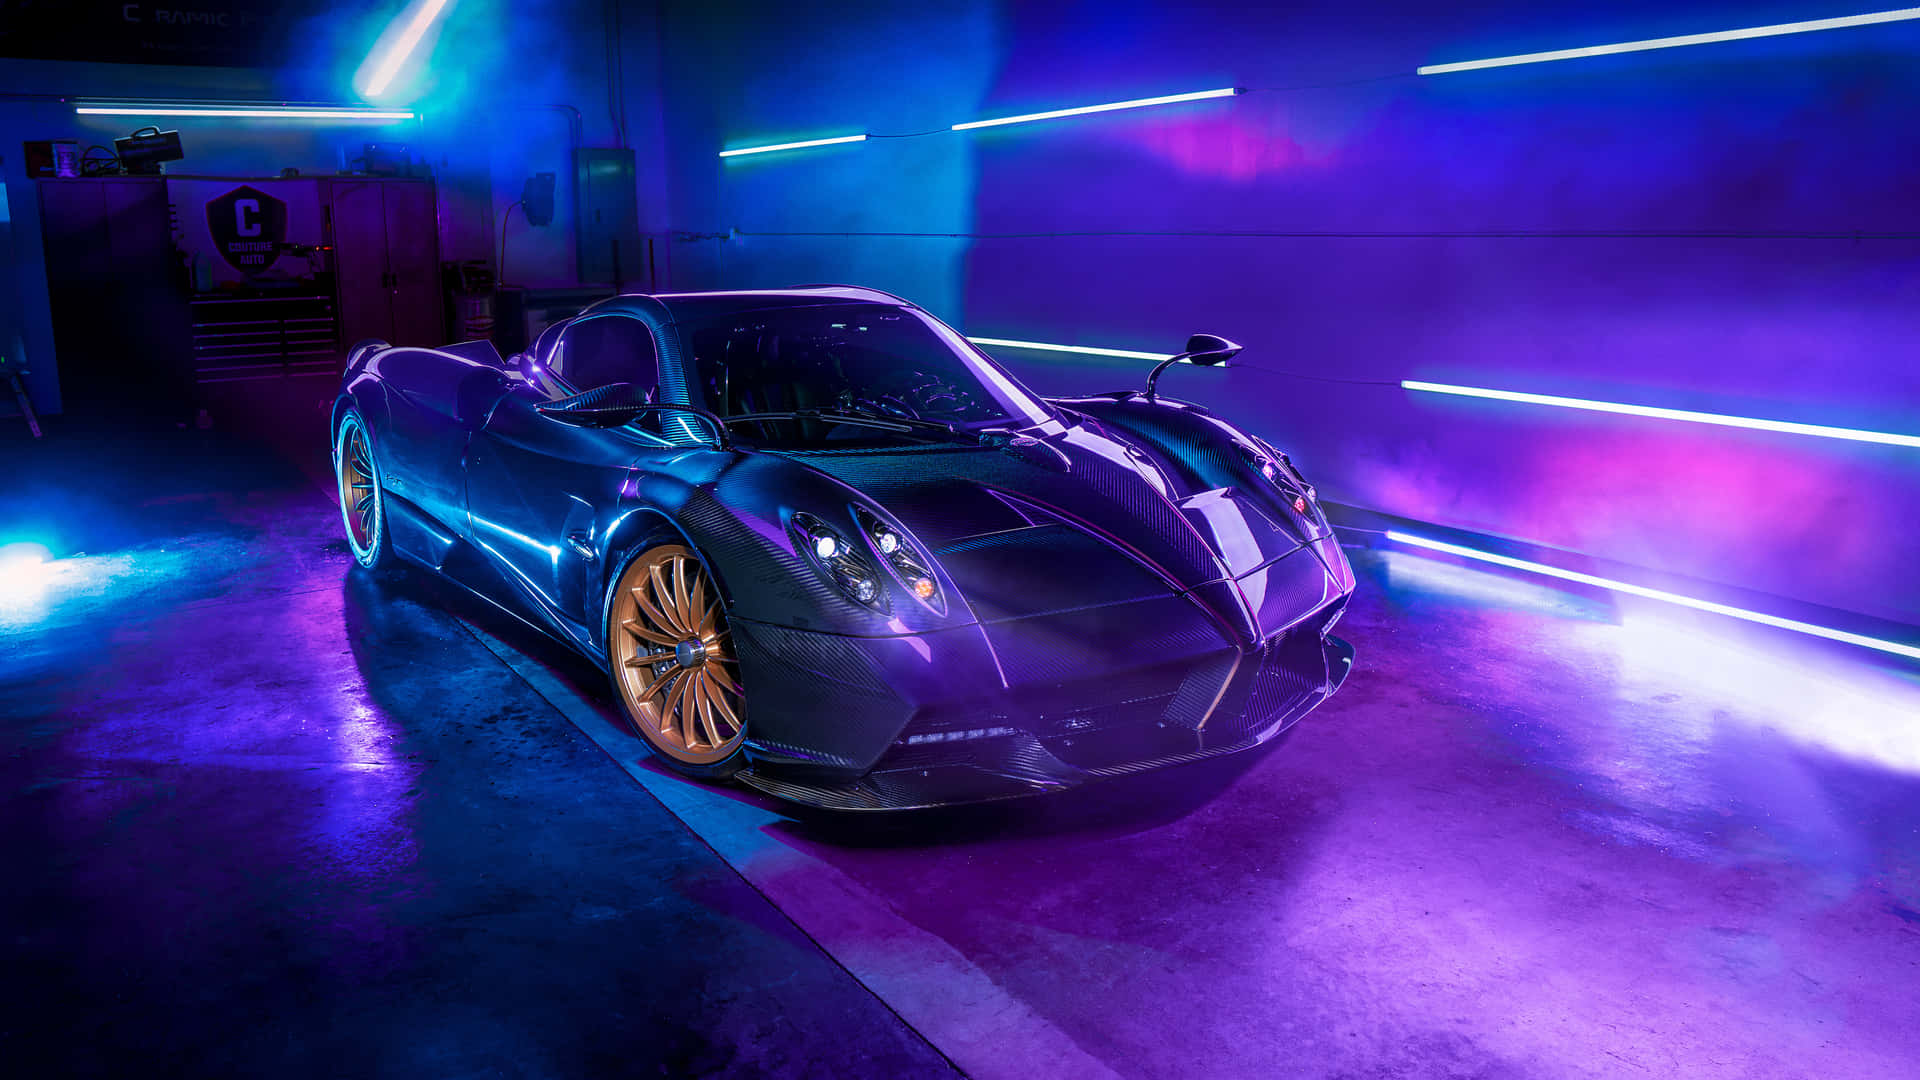 Cool Luxury Car With Neon Purple Lights Picture